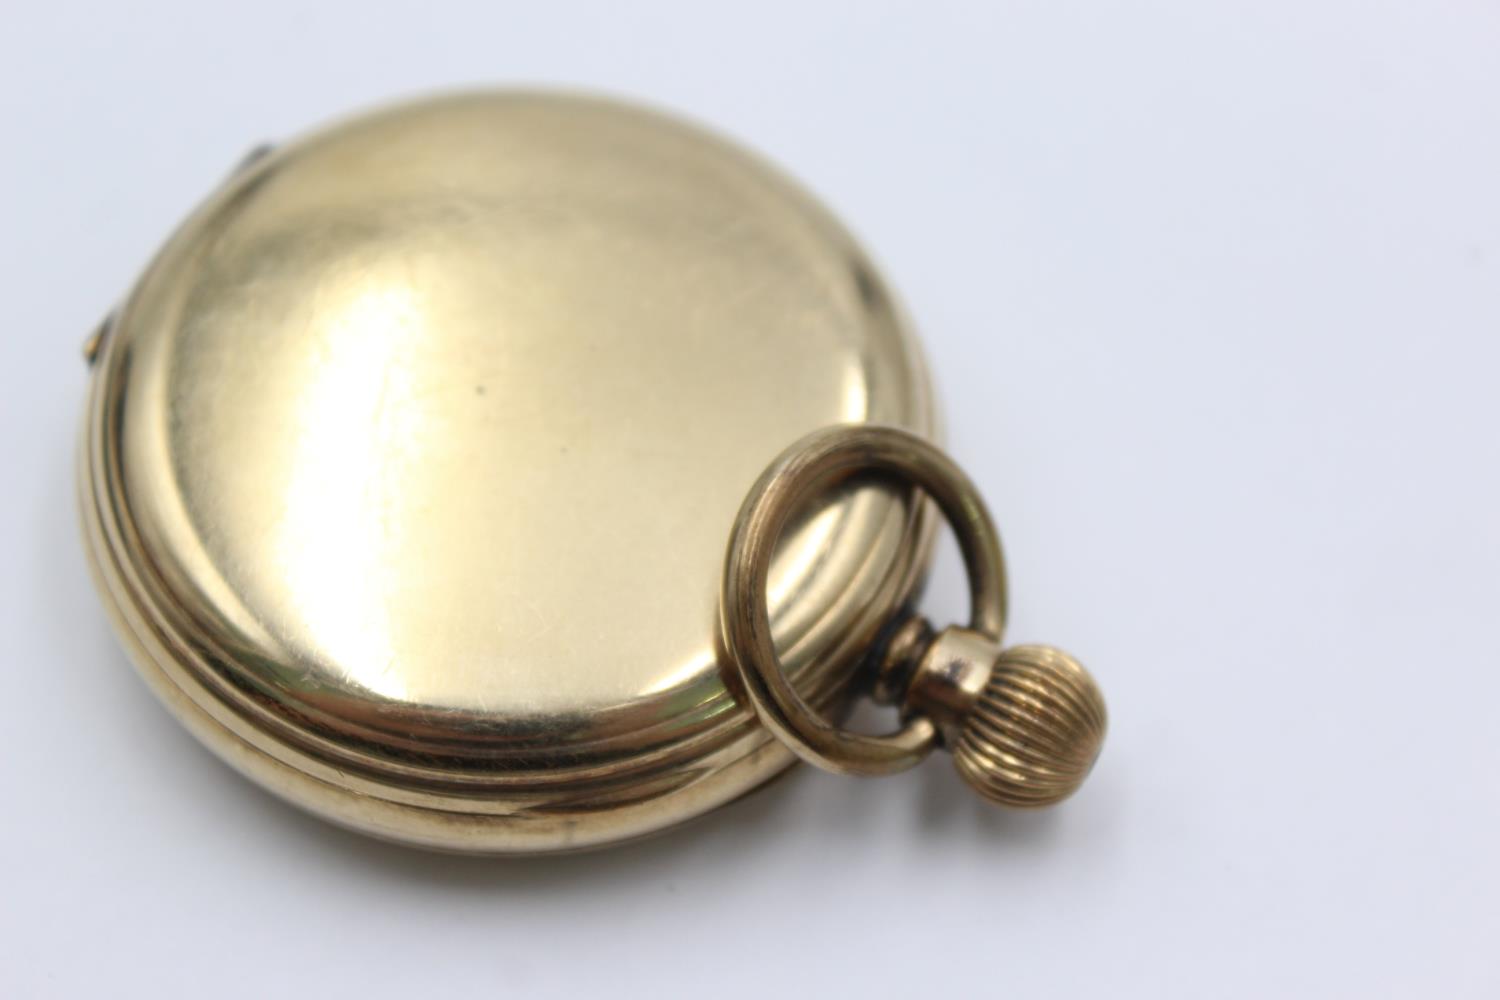 Thos Russell & Son Liverpool gents vintage rolled gold open face pocket watch handwind. Working - Image 4 of 4